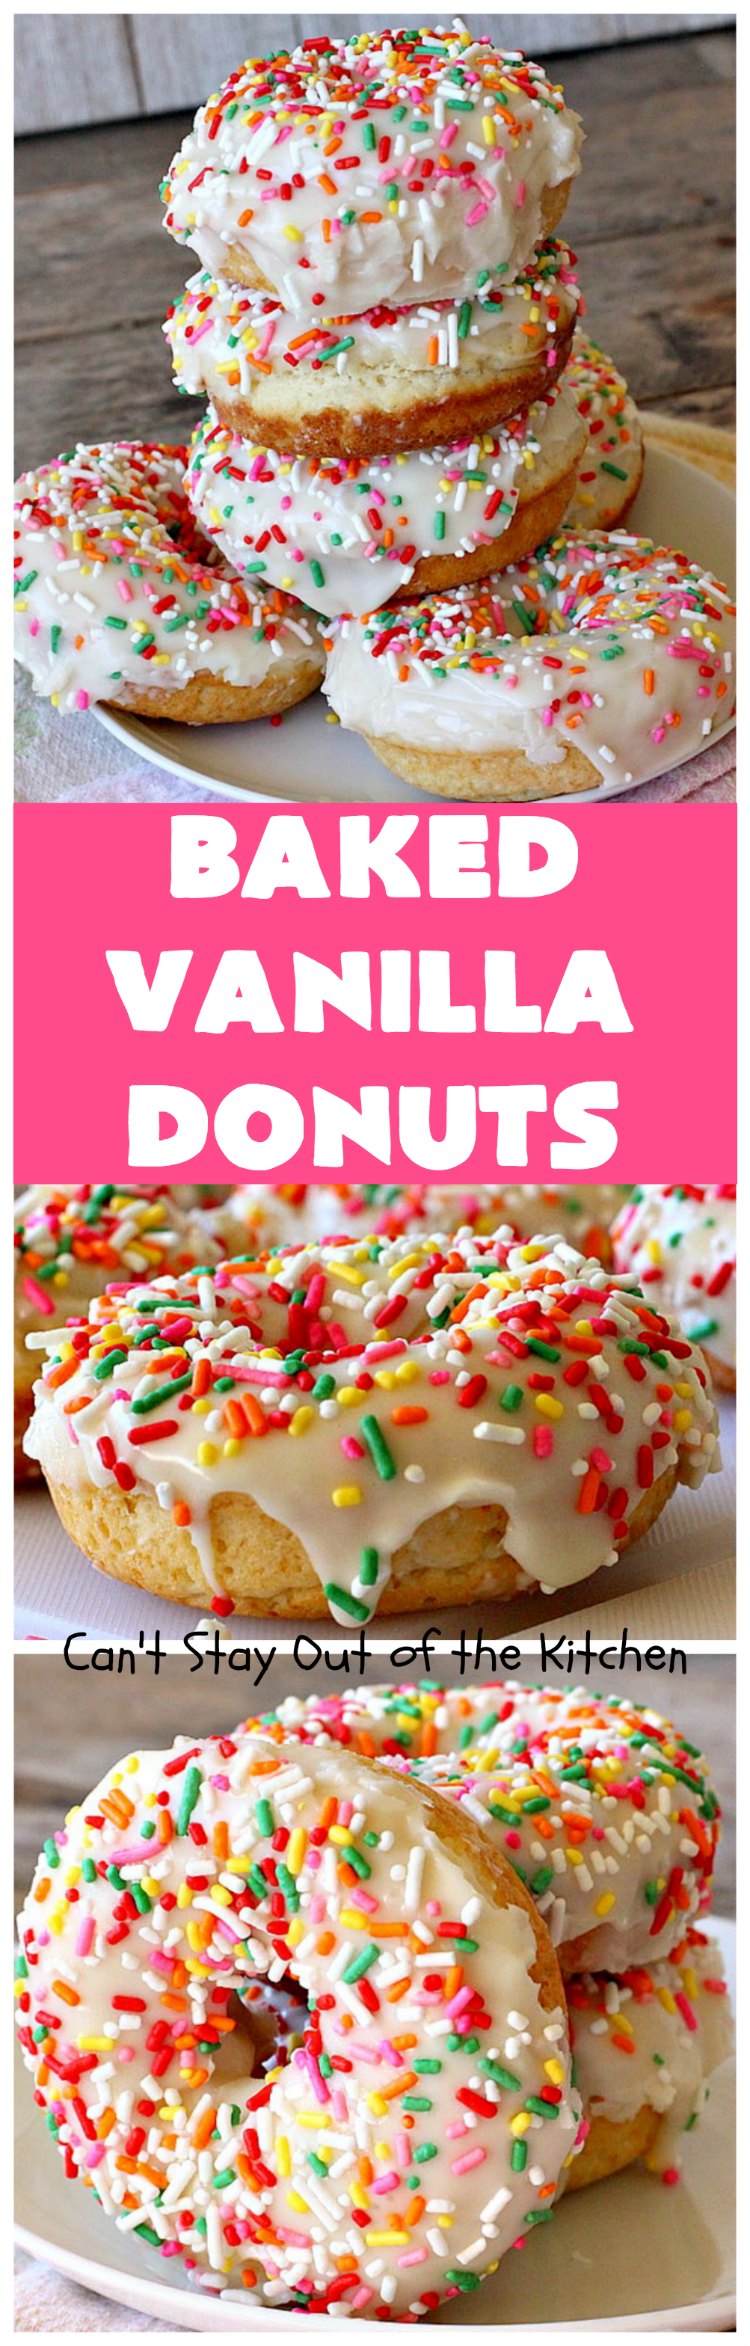 Baked Vanilla Donuts | Can't Stay Out of the KitchenBaked Vanilla Donuts | Can't Stay Out of the Kitchen